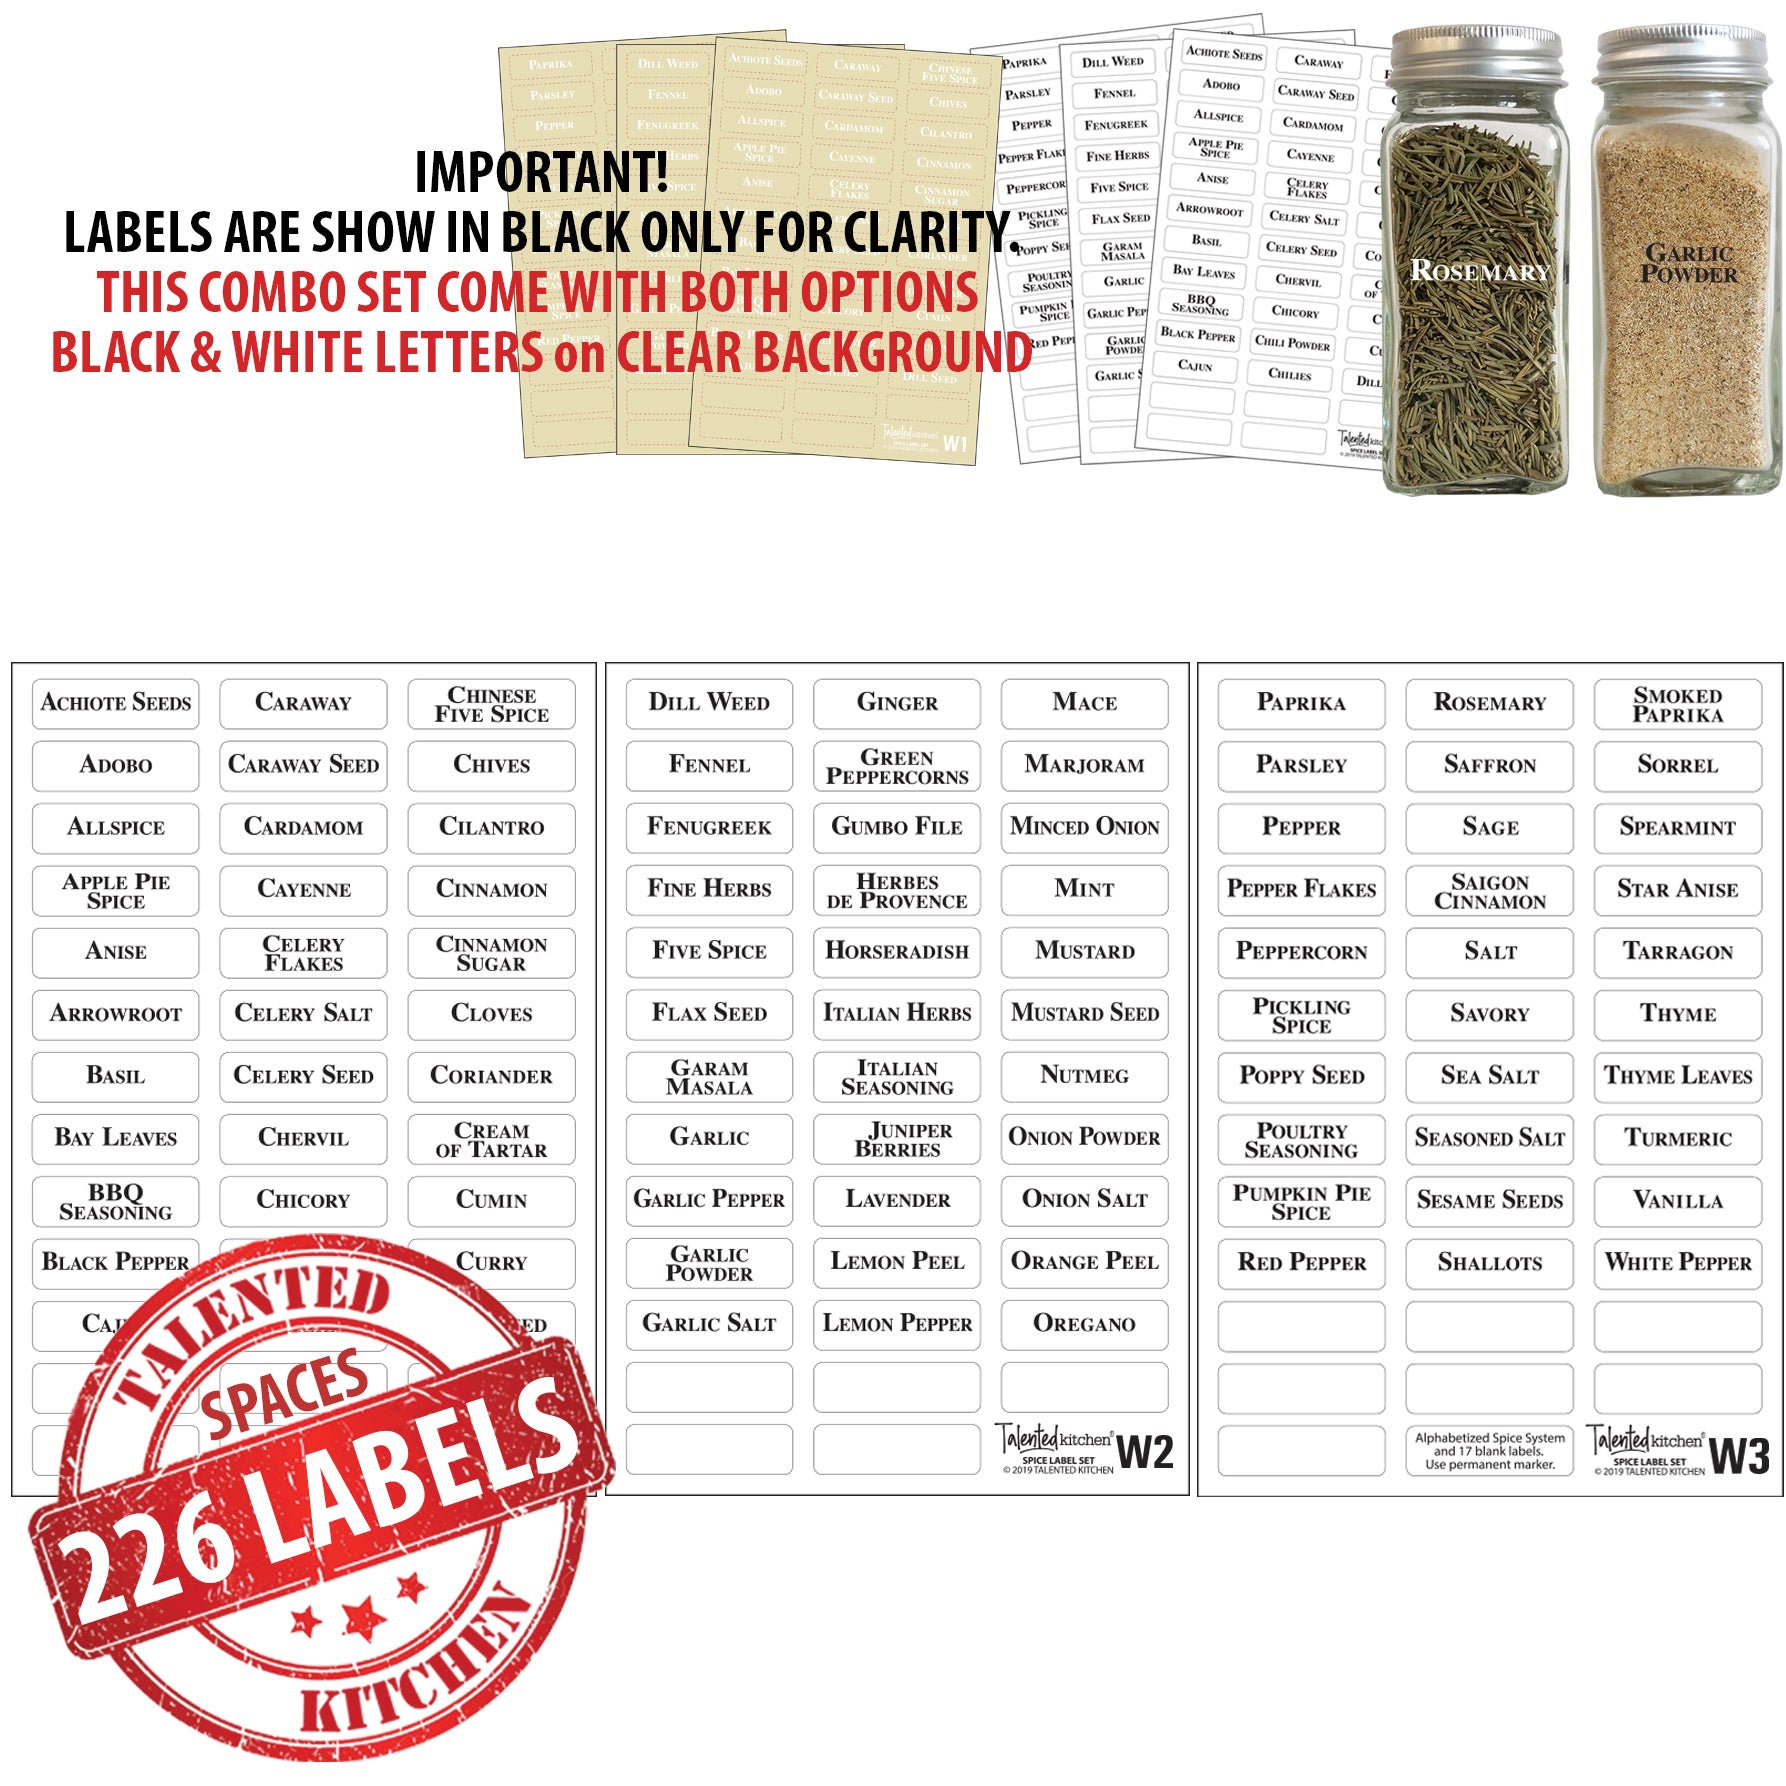 113 Alphabetized Spice Label System: 96 Spice Names + 17 Blank Labels by Talented Kitchen. Clear PVC Sticker and Black Lettering. Preprinted Spice